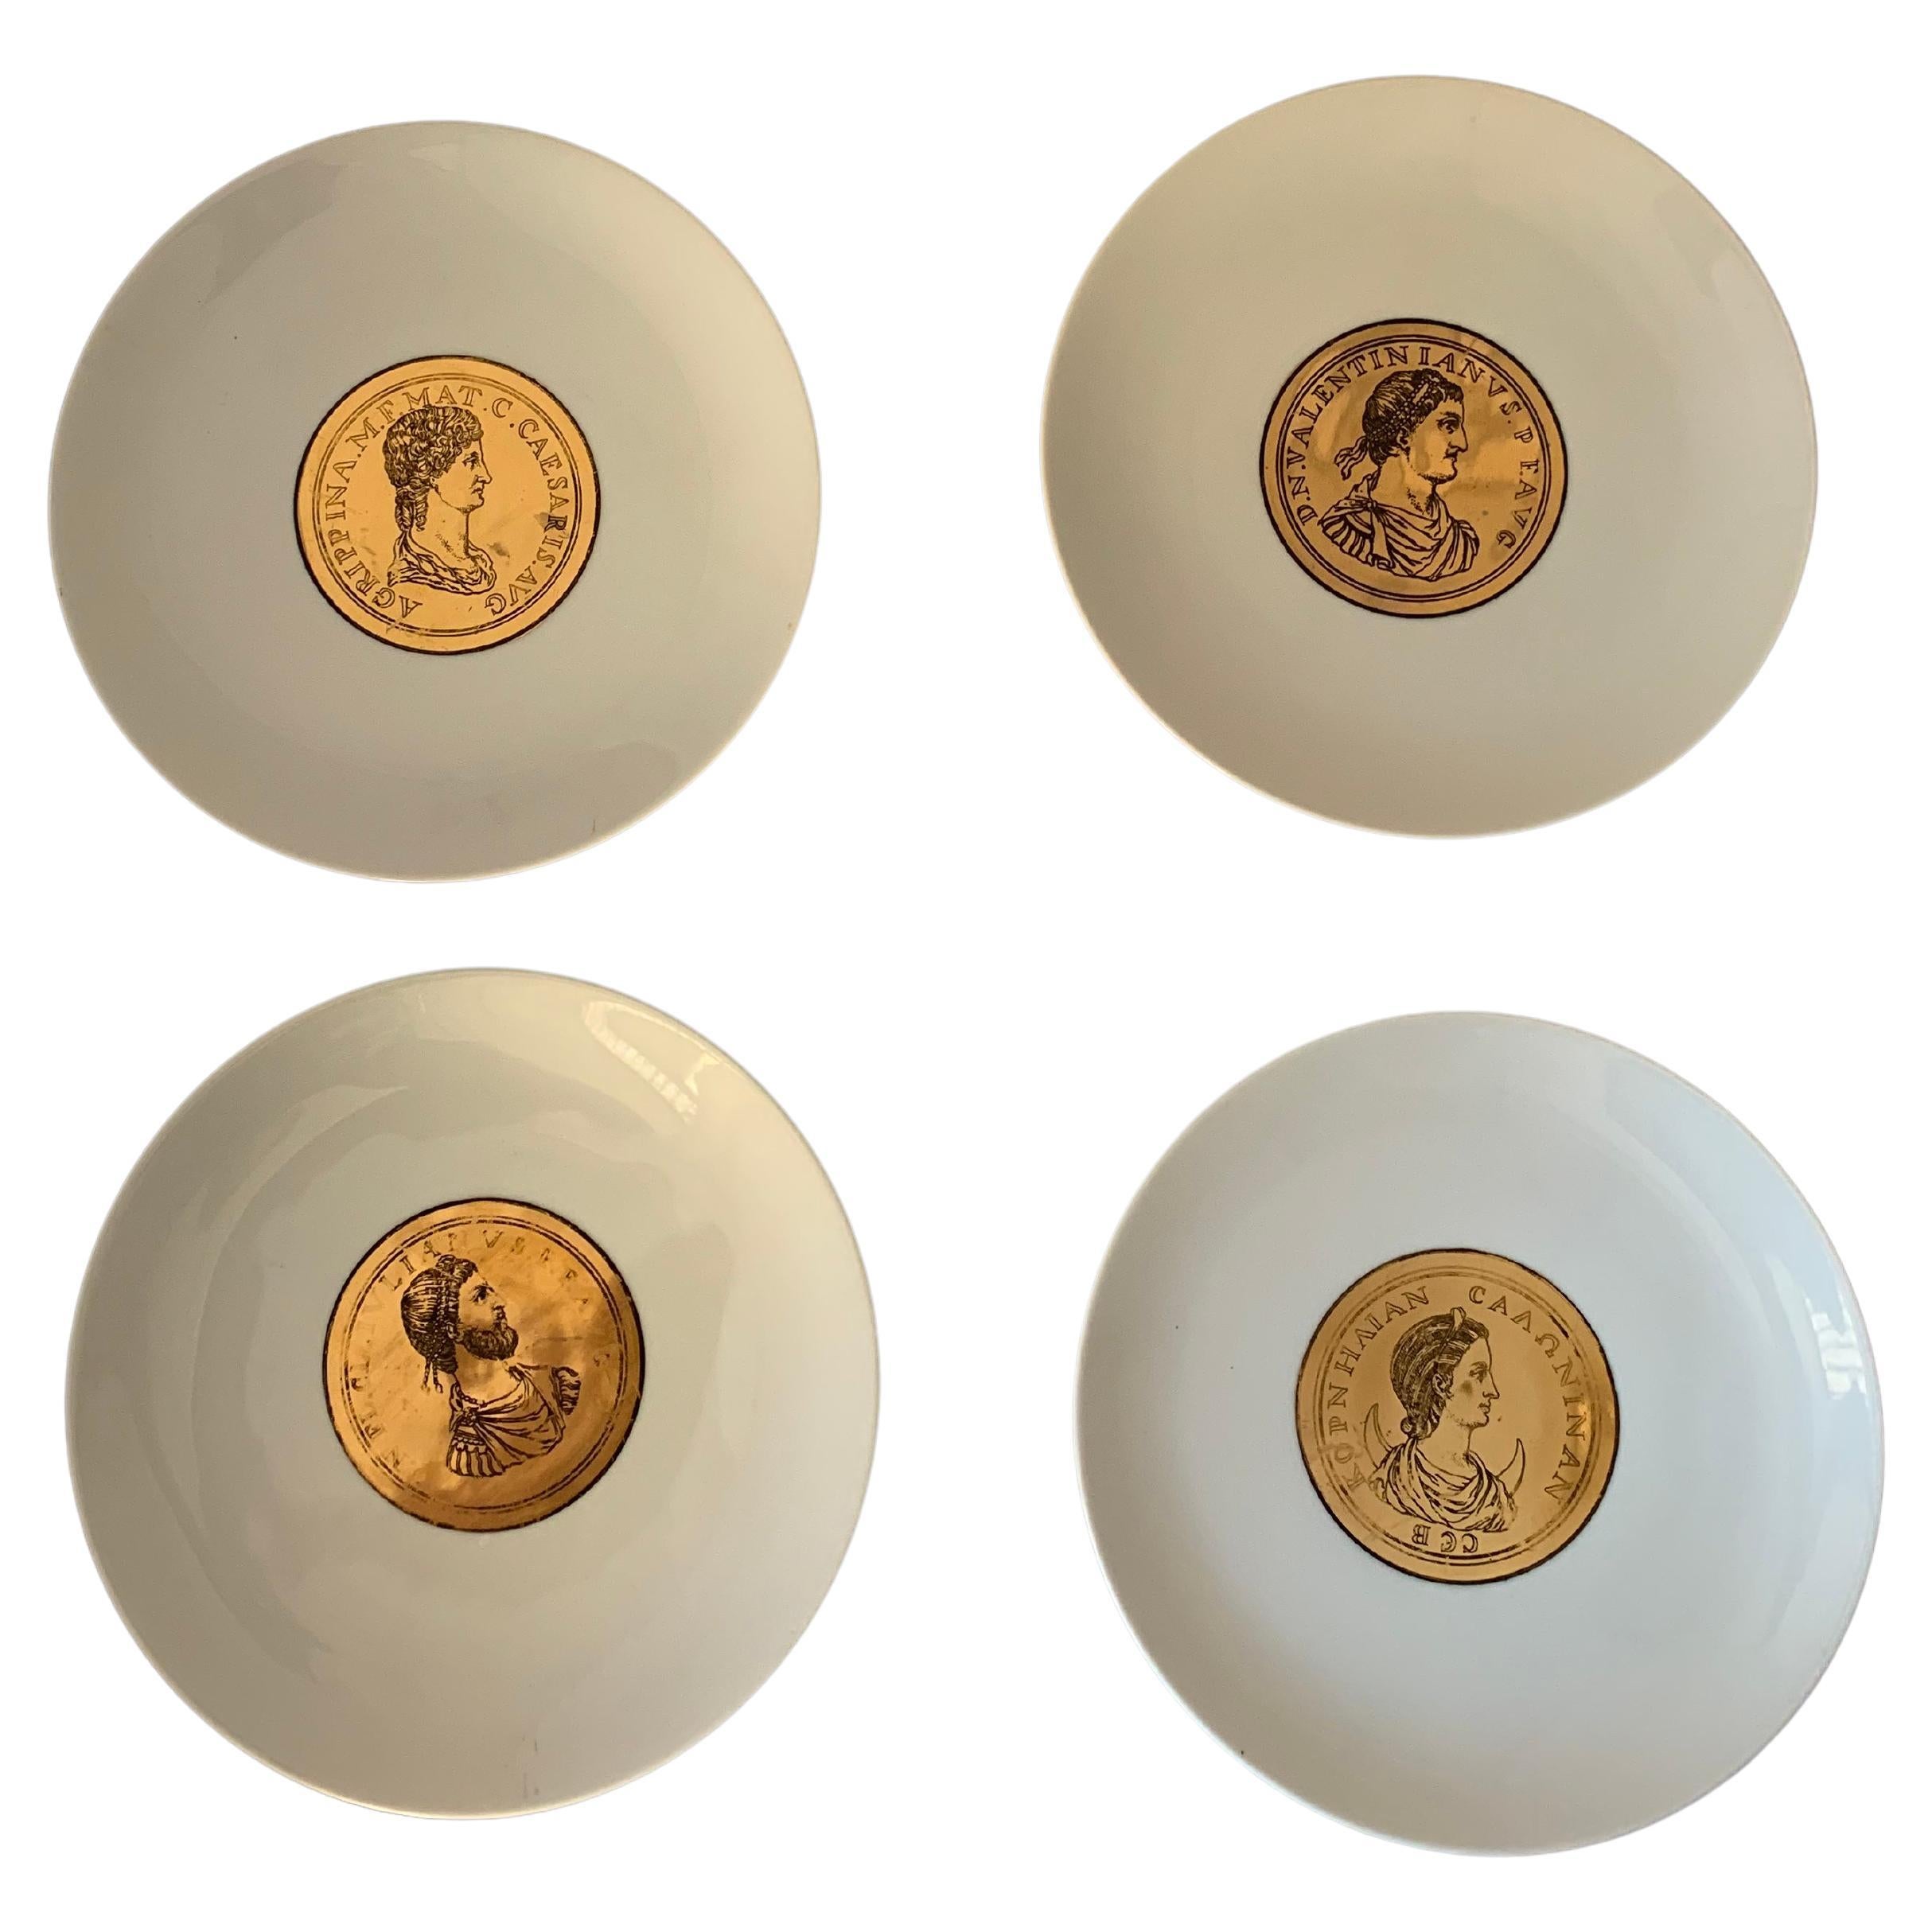 Emporers Plates by Atelier Fornasetti, 1940s, Set of 4